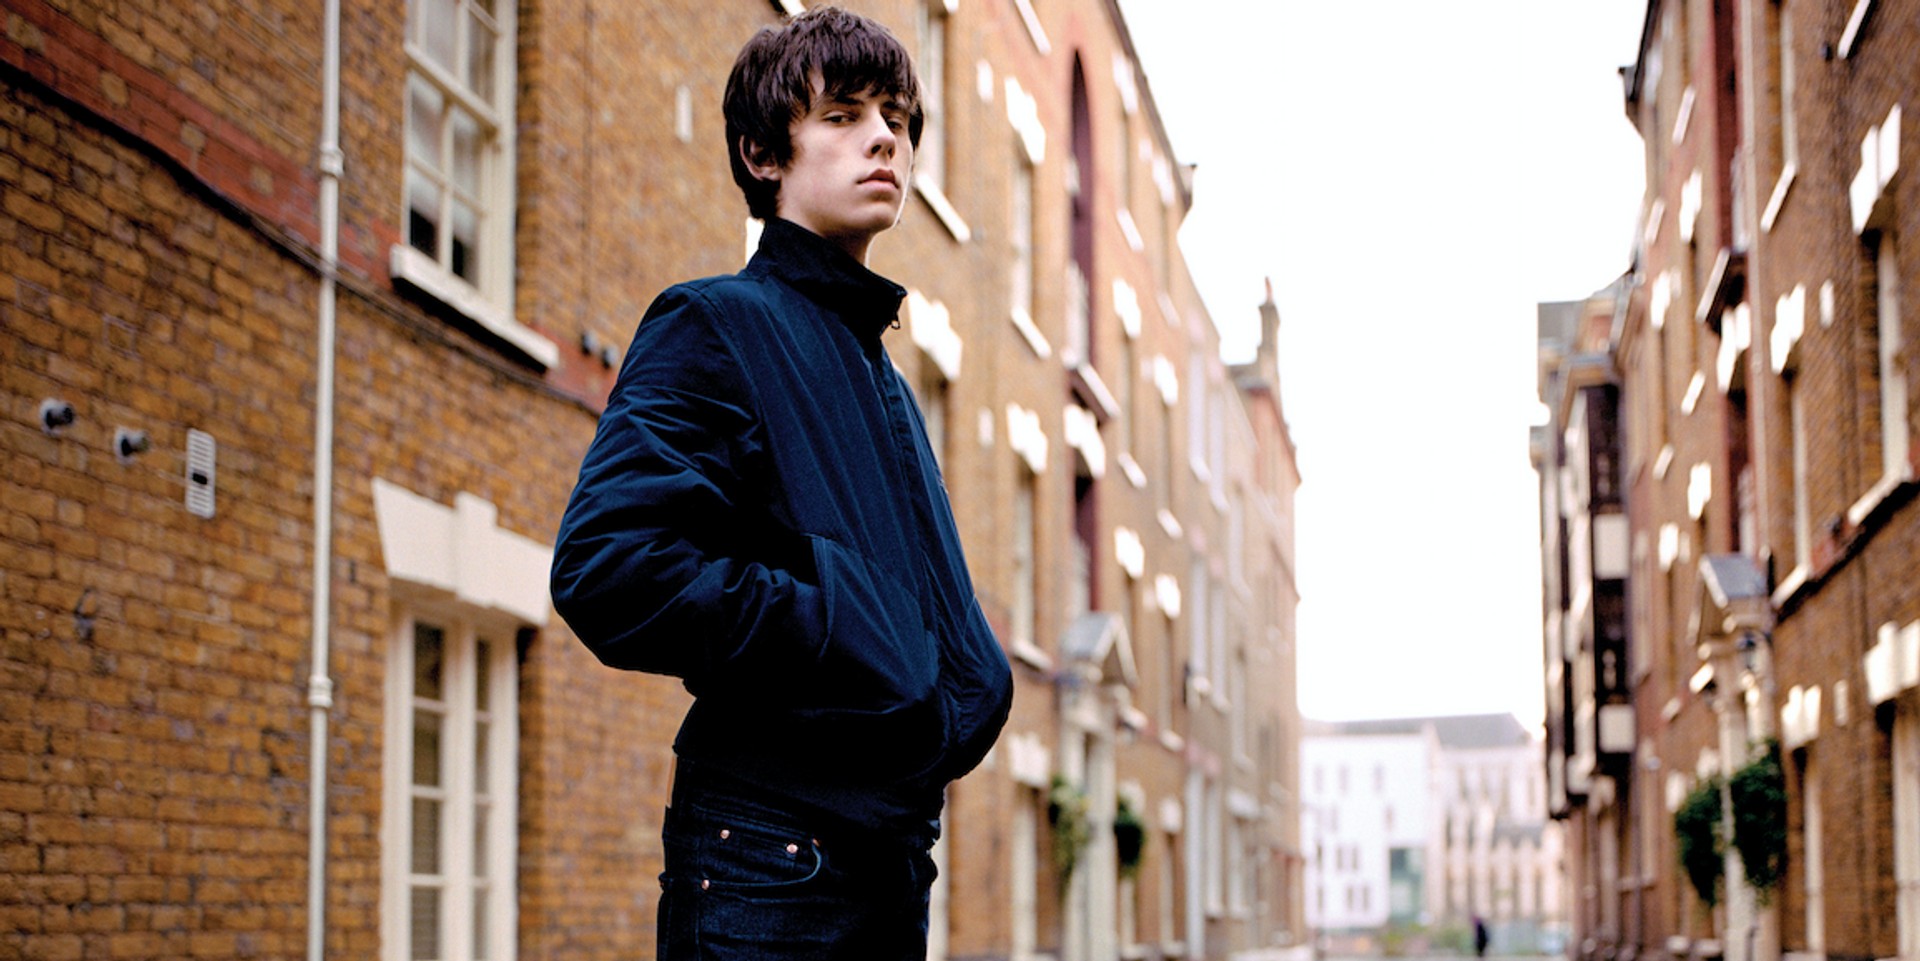 Jake Bugg to perform in Singapore in April